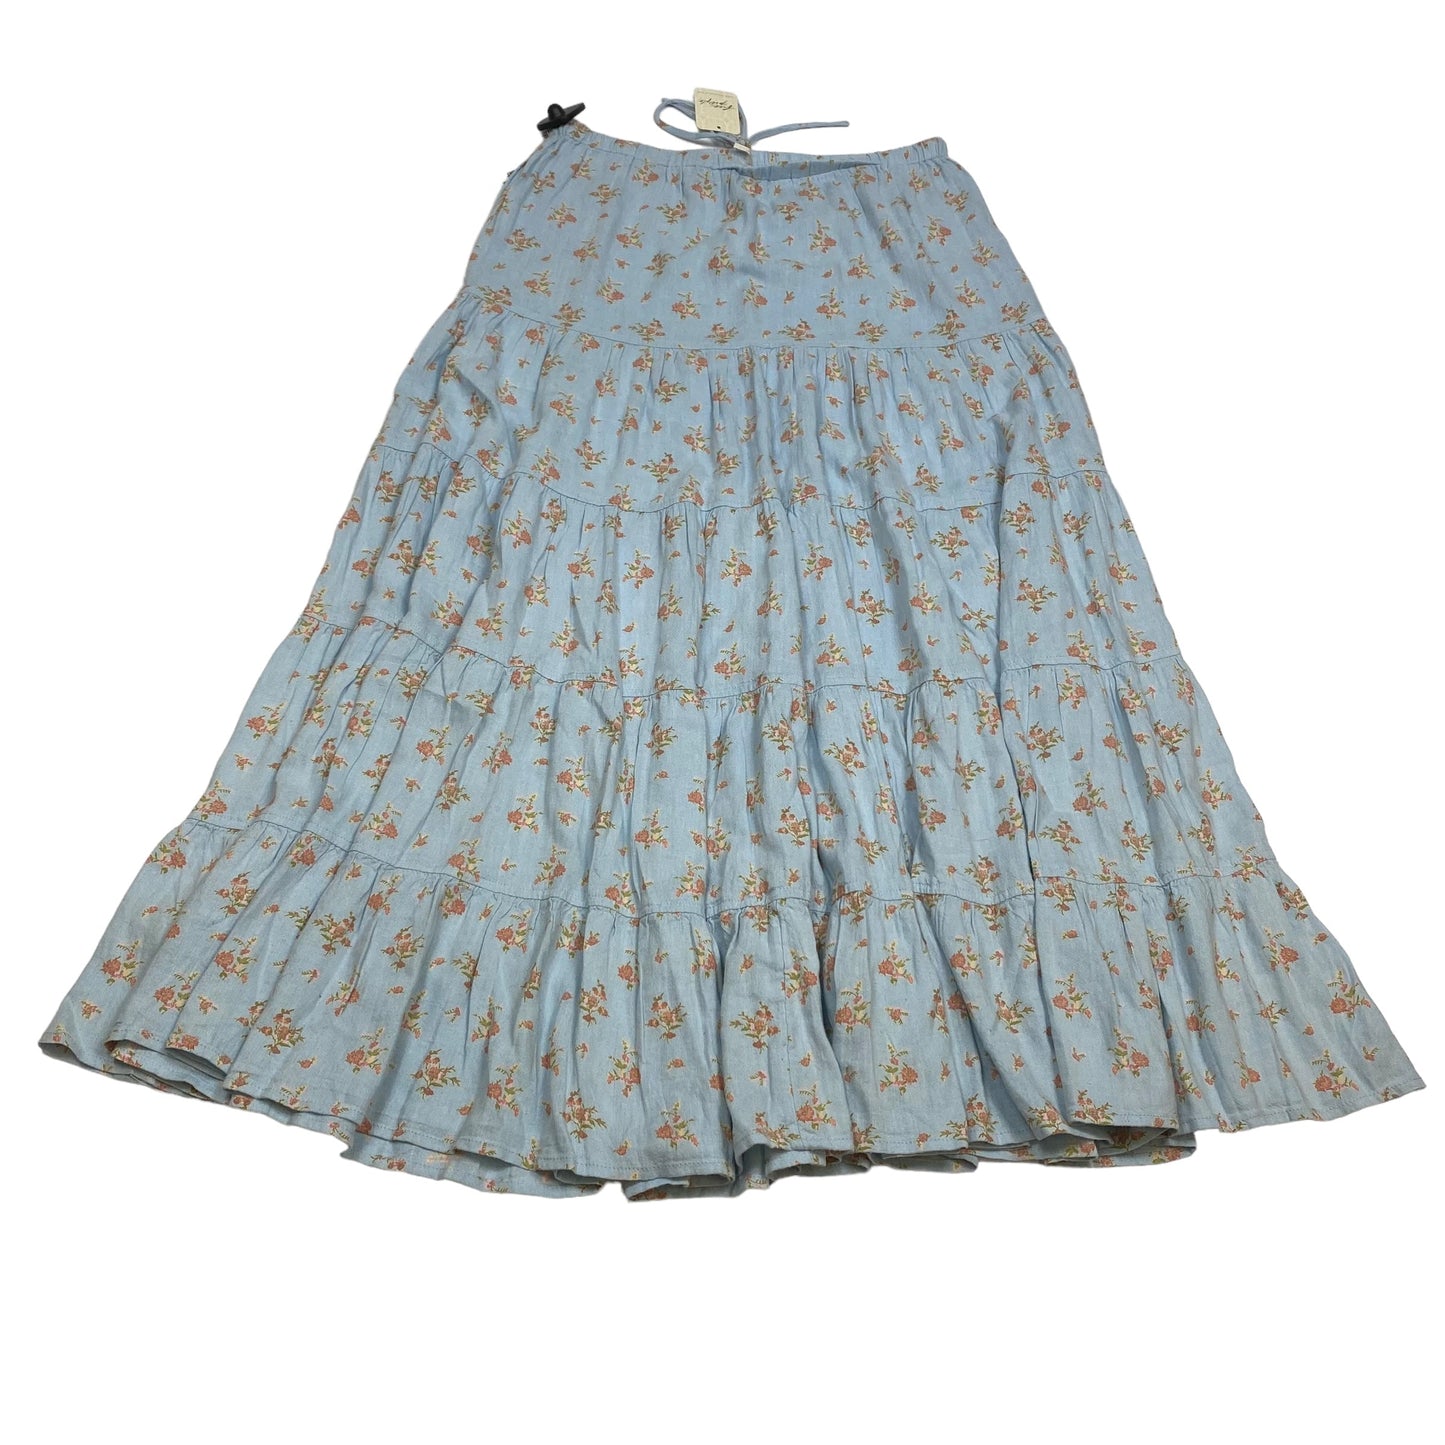 Blue Skirt Maxi Free People, Size S